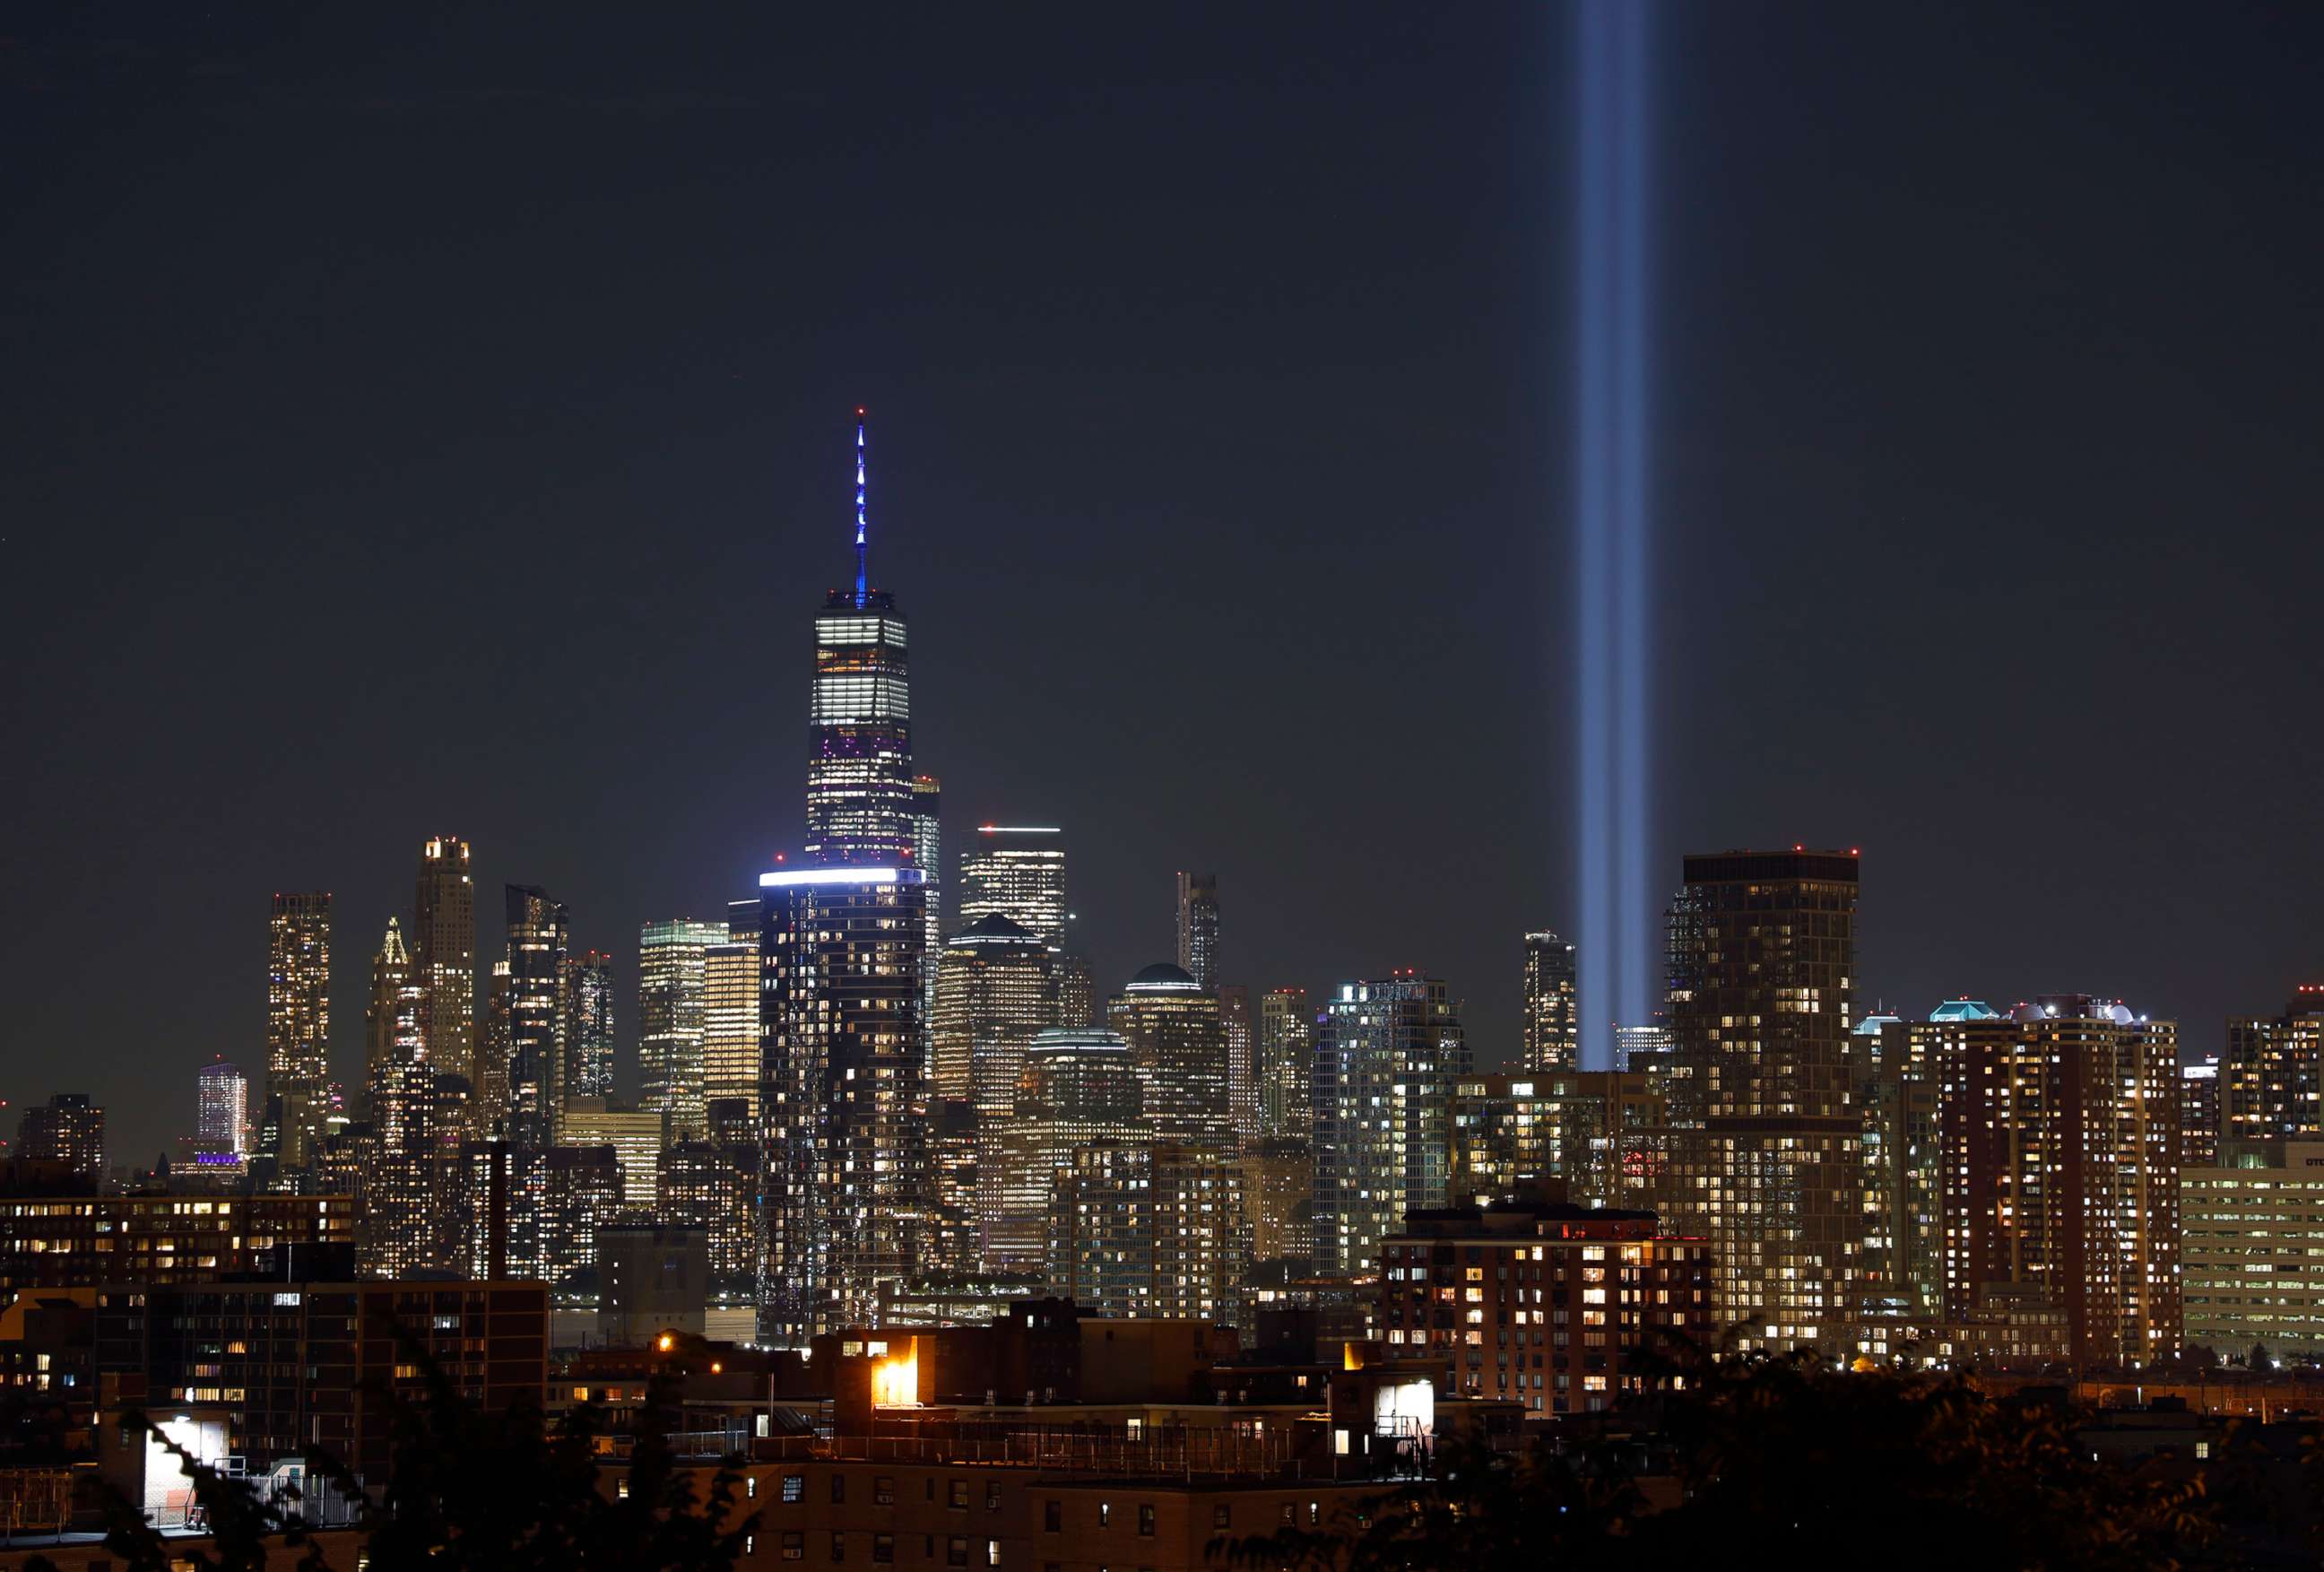 PHOTO: The annual Tribute in Light is illuminated on the skyline of lower Manhattan on the 18th anniversary of the 9/11 attacks in New York City on Sept. 11, 2019 as seen from Jersey City, N.J.